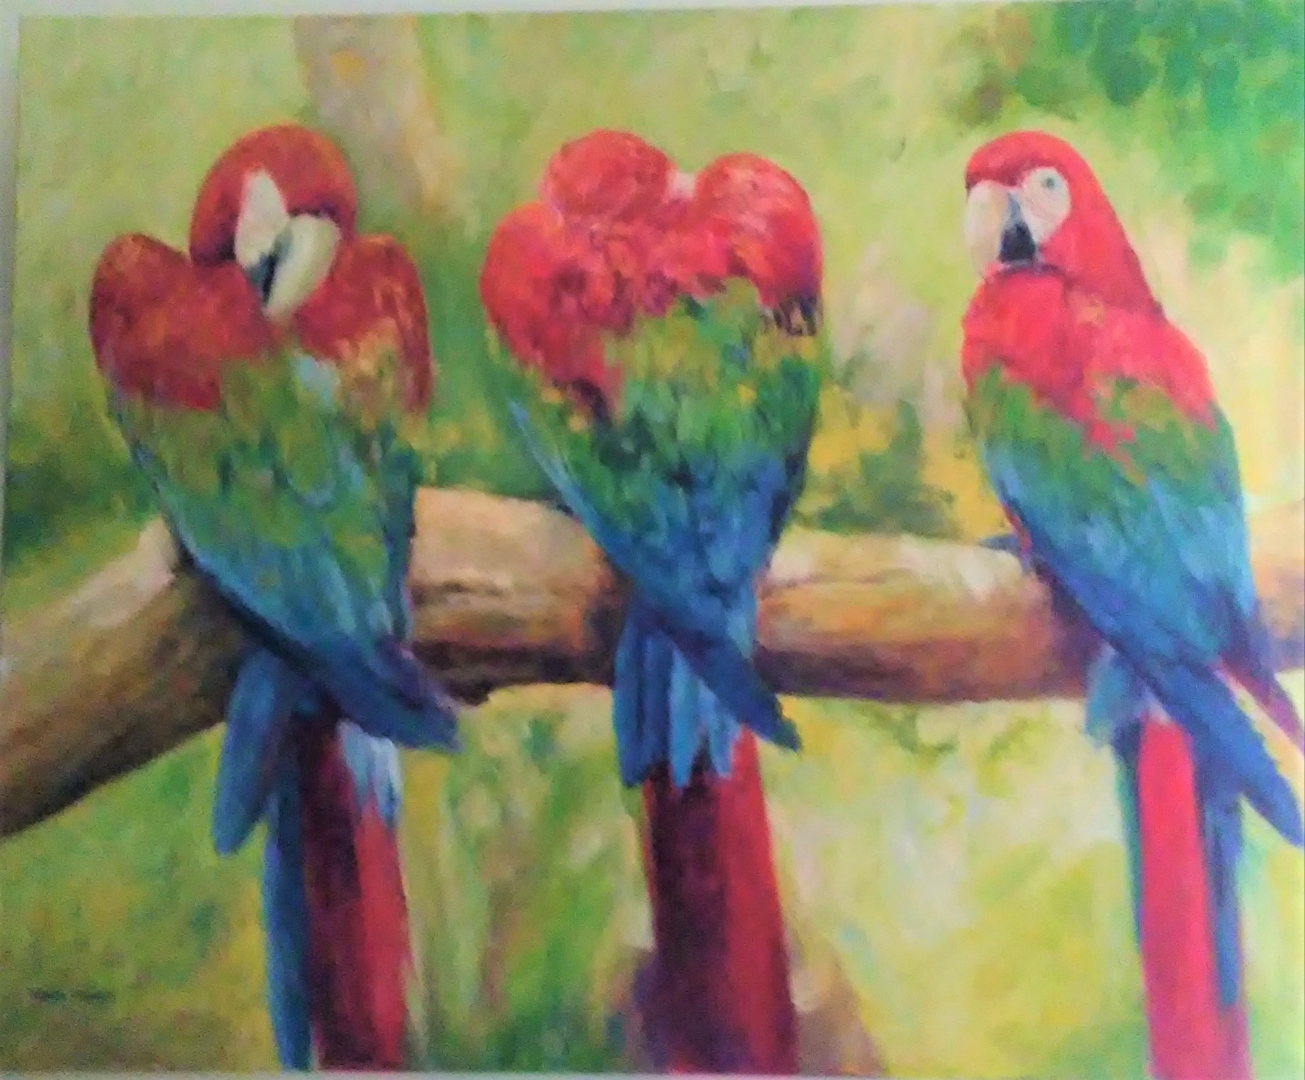 Three Tropical Macaos on a branch.